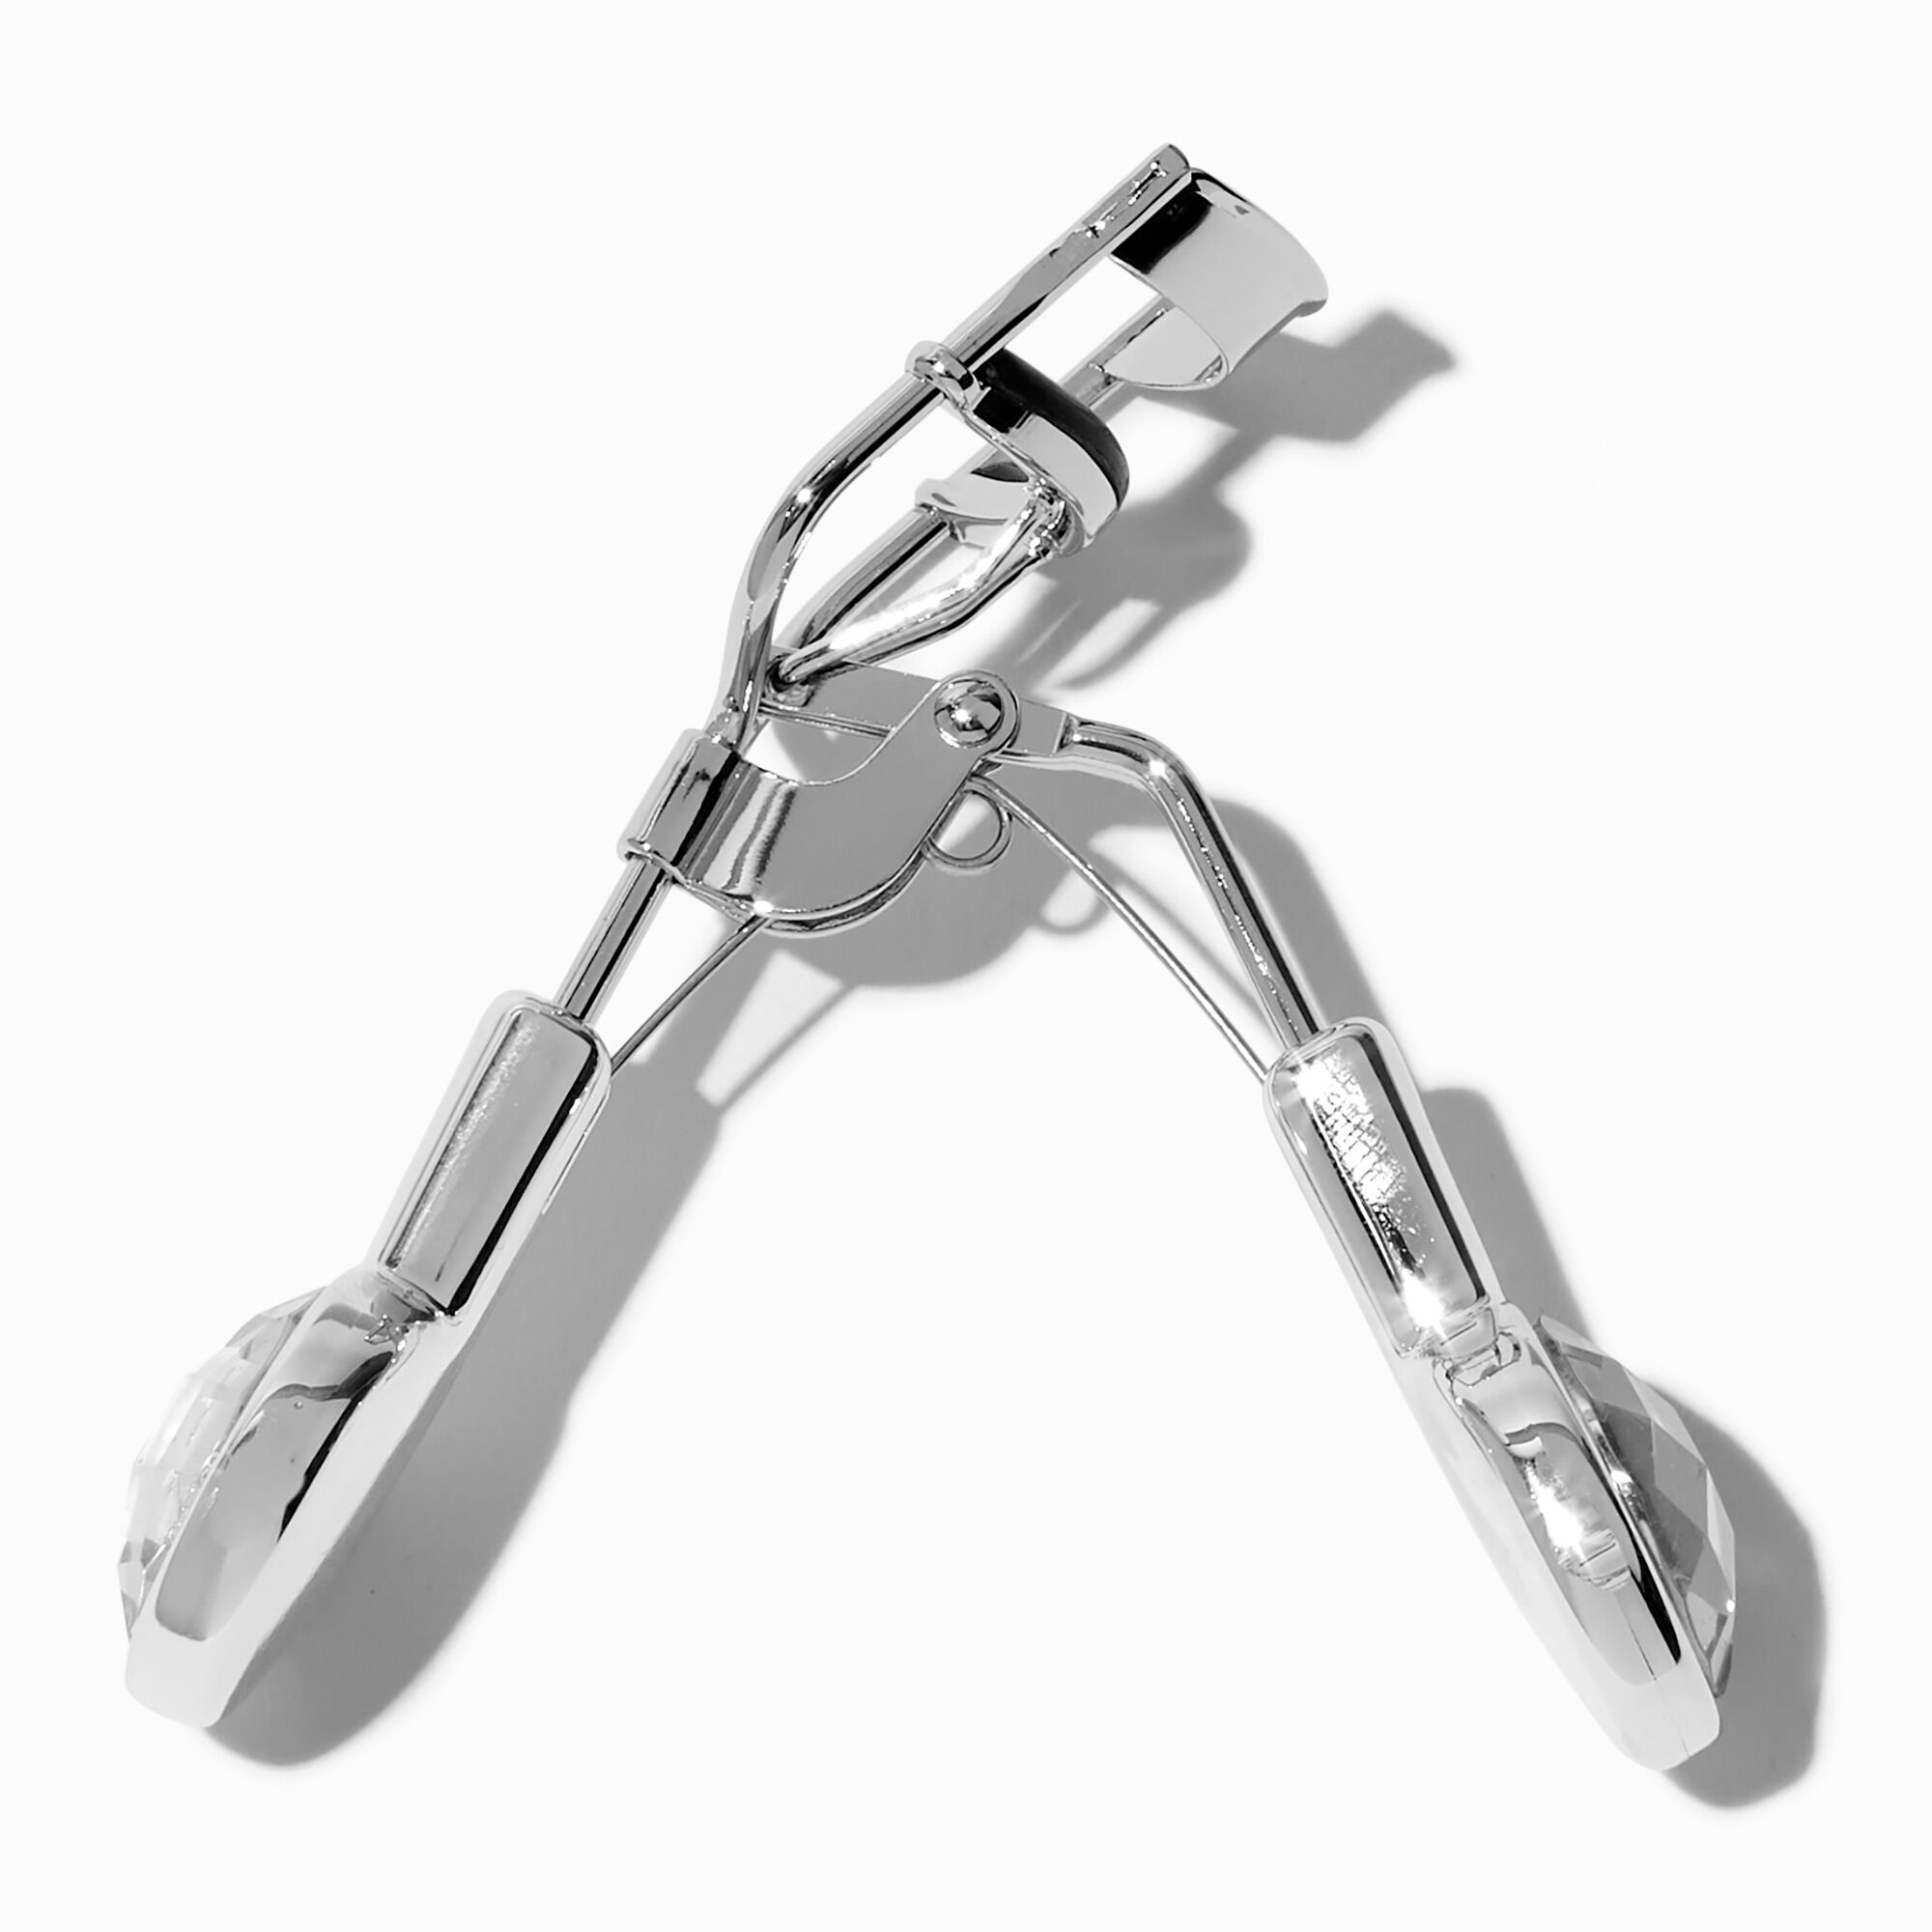 View Claires Eyelash Curler Silver information